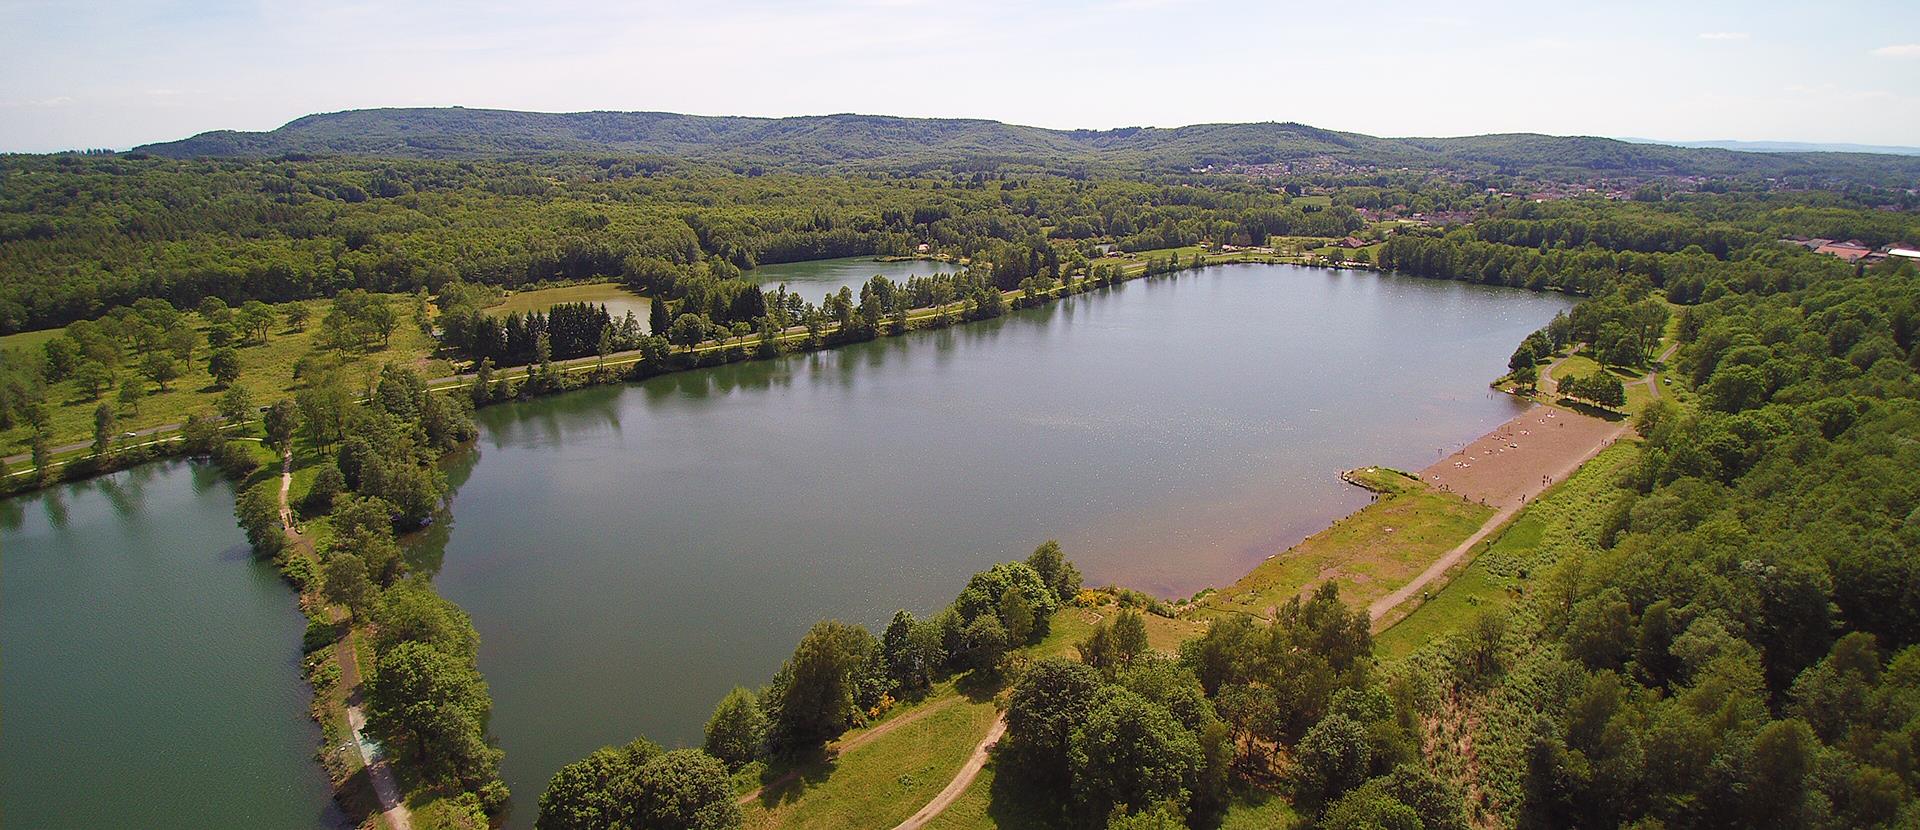 Aerial view of the Ballastières lakes in Haute-Saône